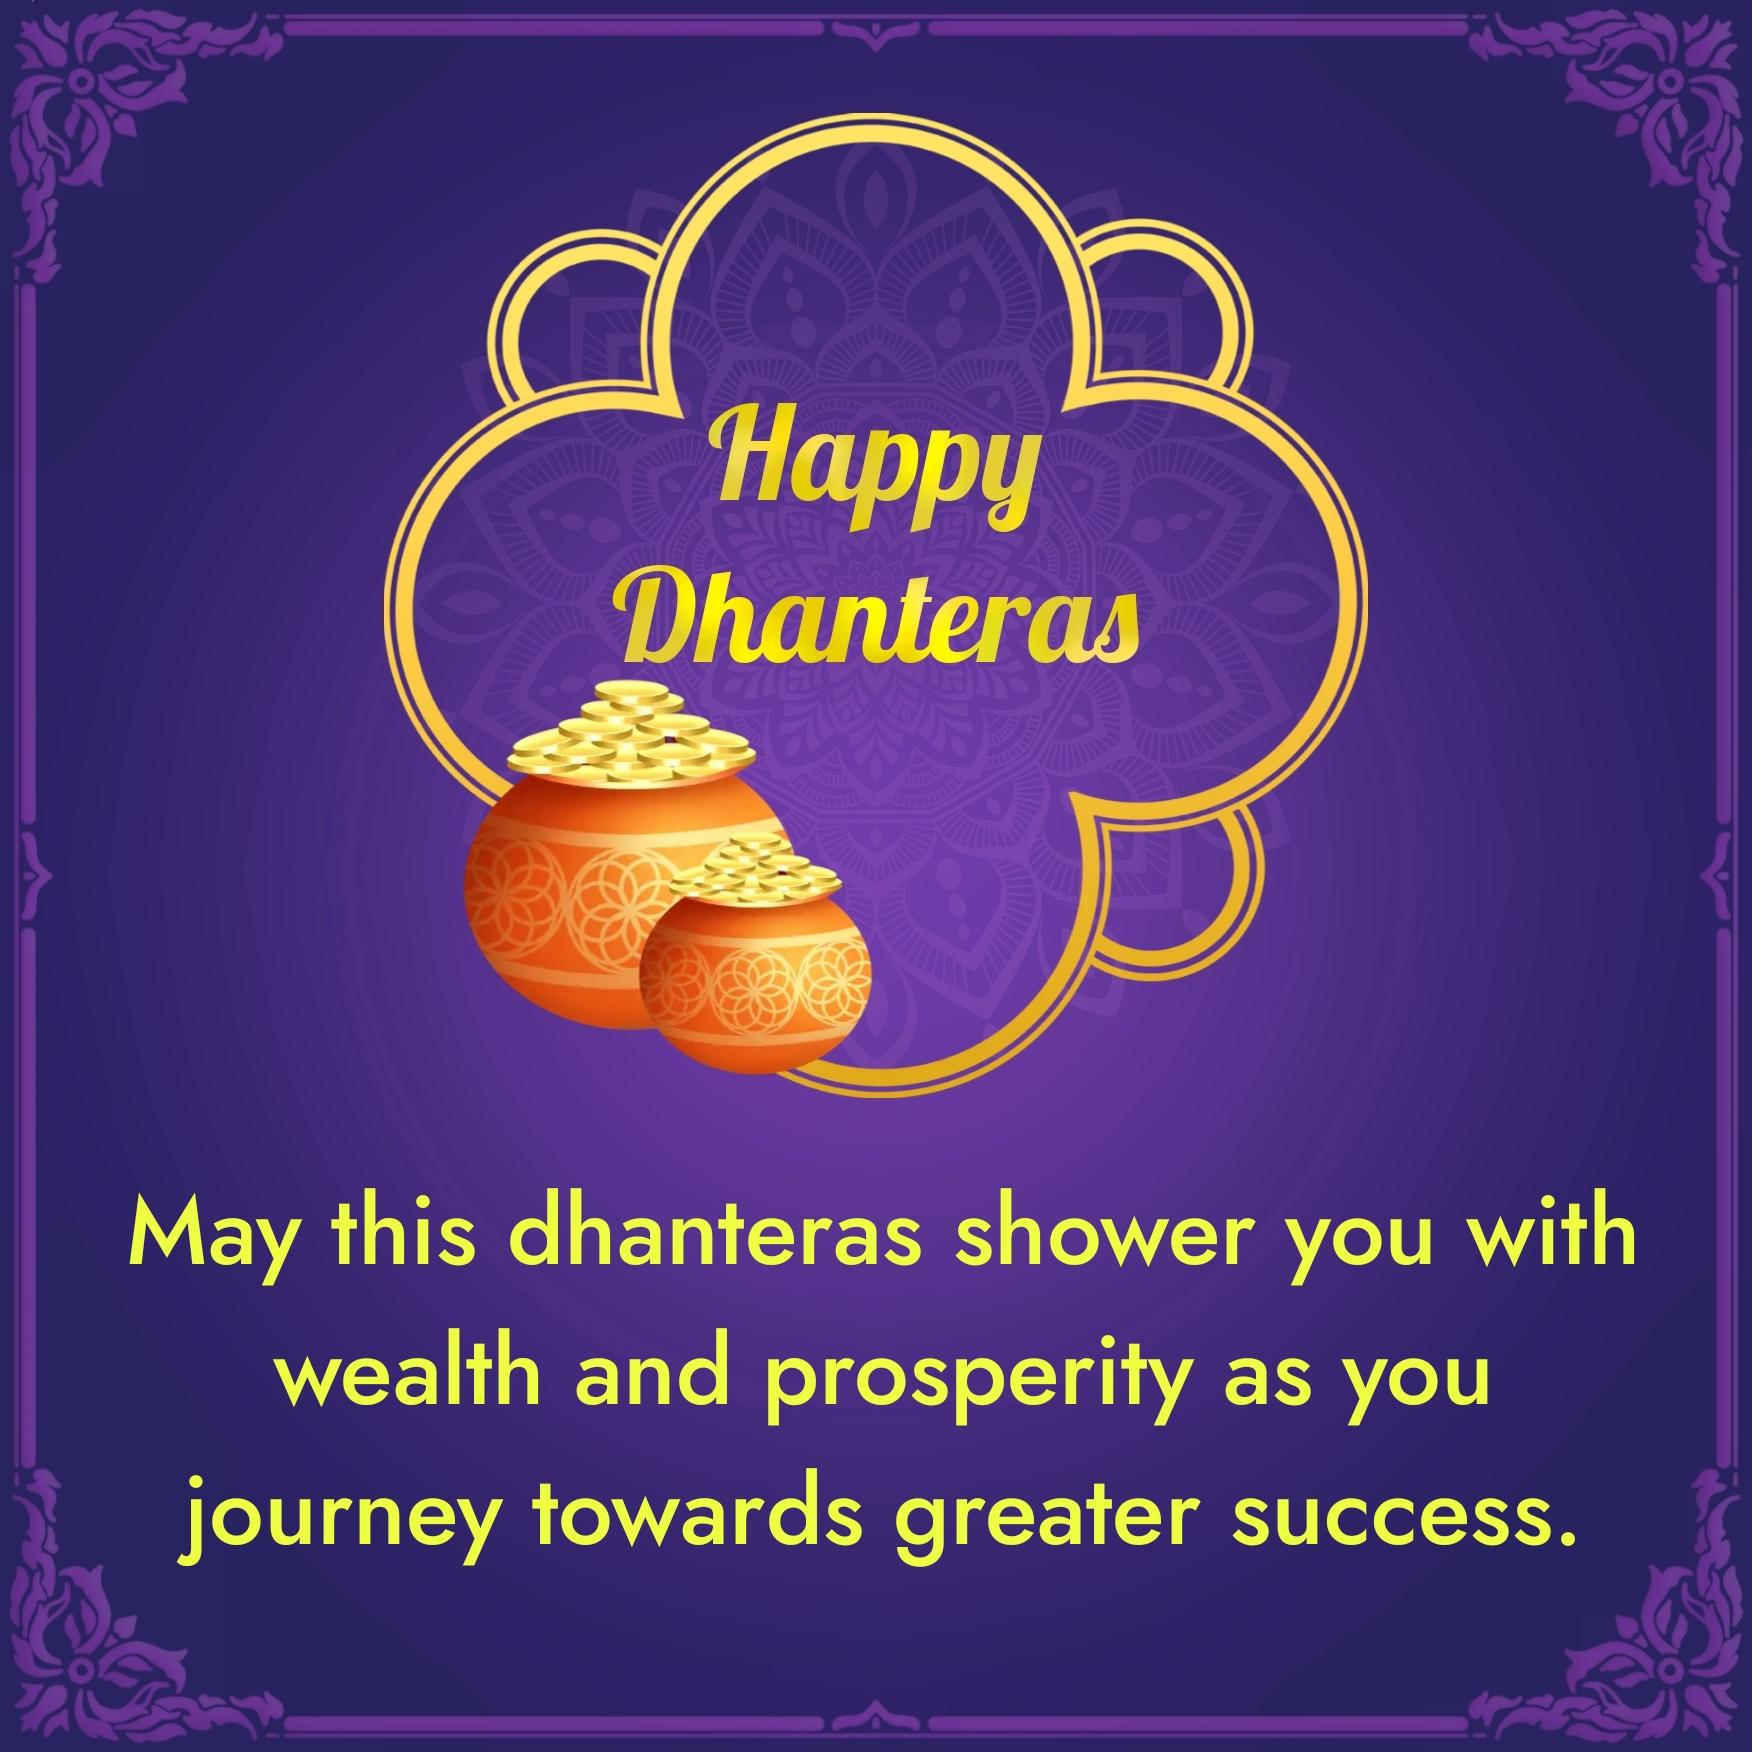 May this dhanteras shower you with wealth and prosperity